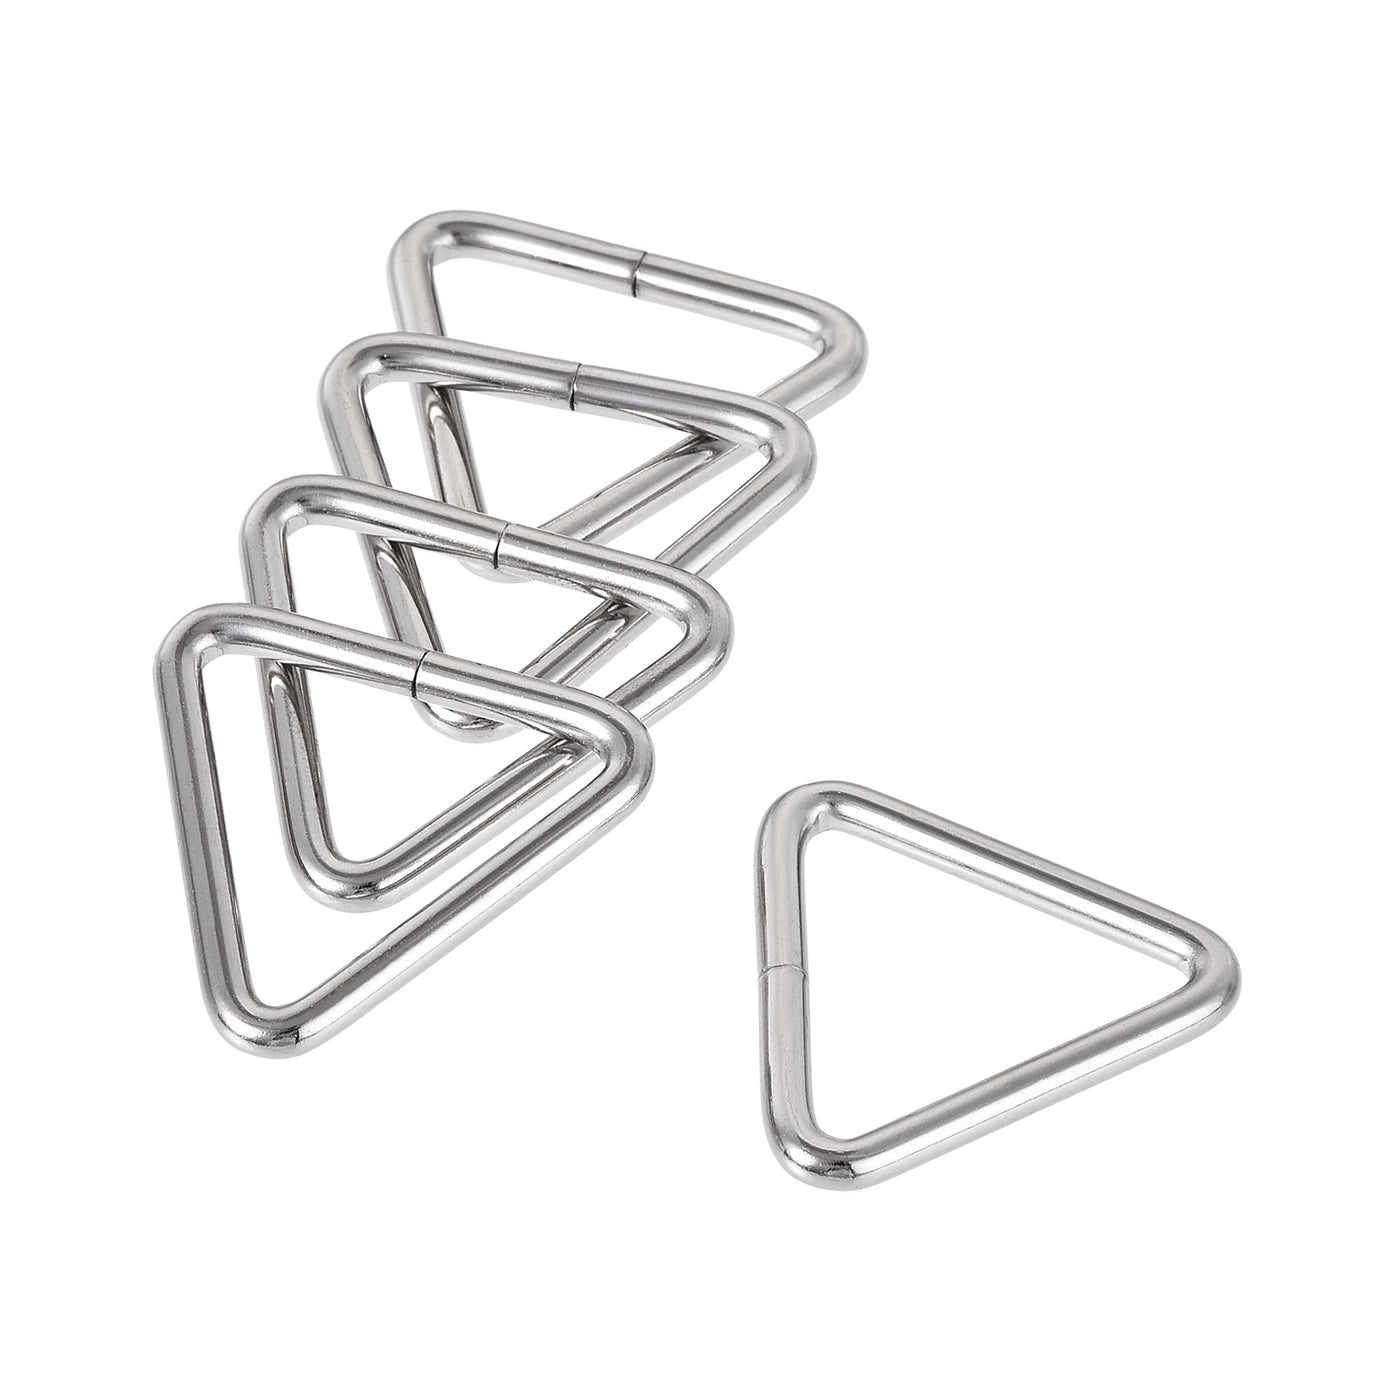 Uxcell Uxcell Metal Triangle Ring Buckle 1.26"(32mm) Inner Width for Strap Craft DIY 30pcs